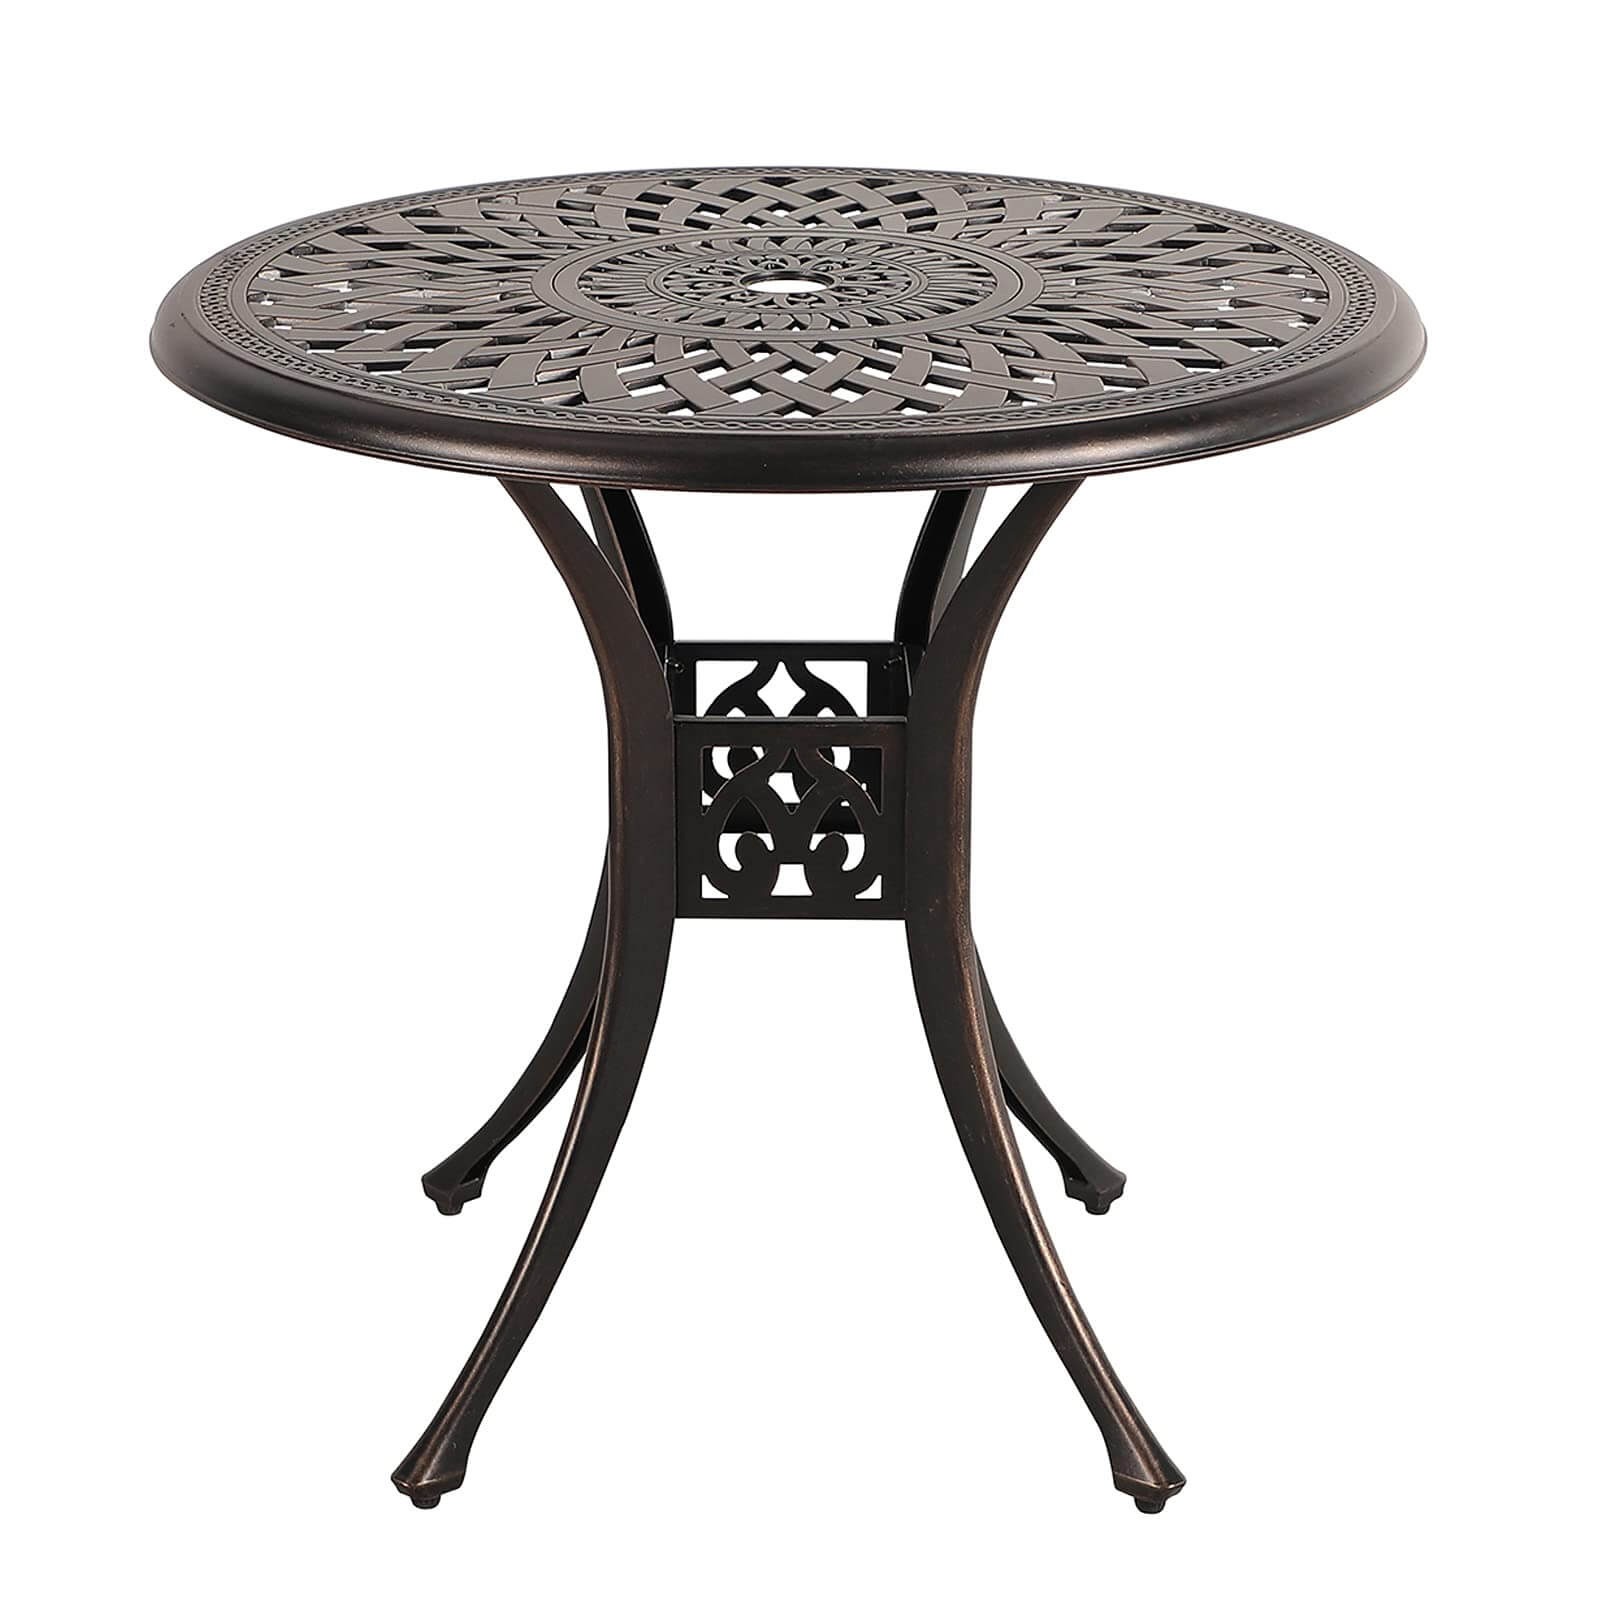 Patio Bistro Table, 31’’ Round Cast Aluminum Outdoor Dining Retro Side Table with 2’’ Umbrella Hole, Bronze